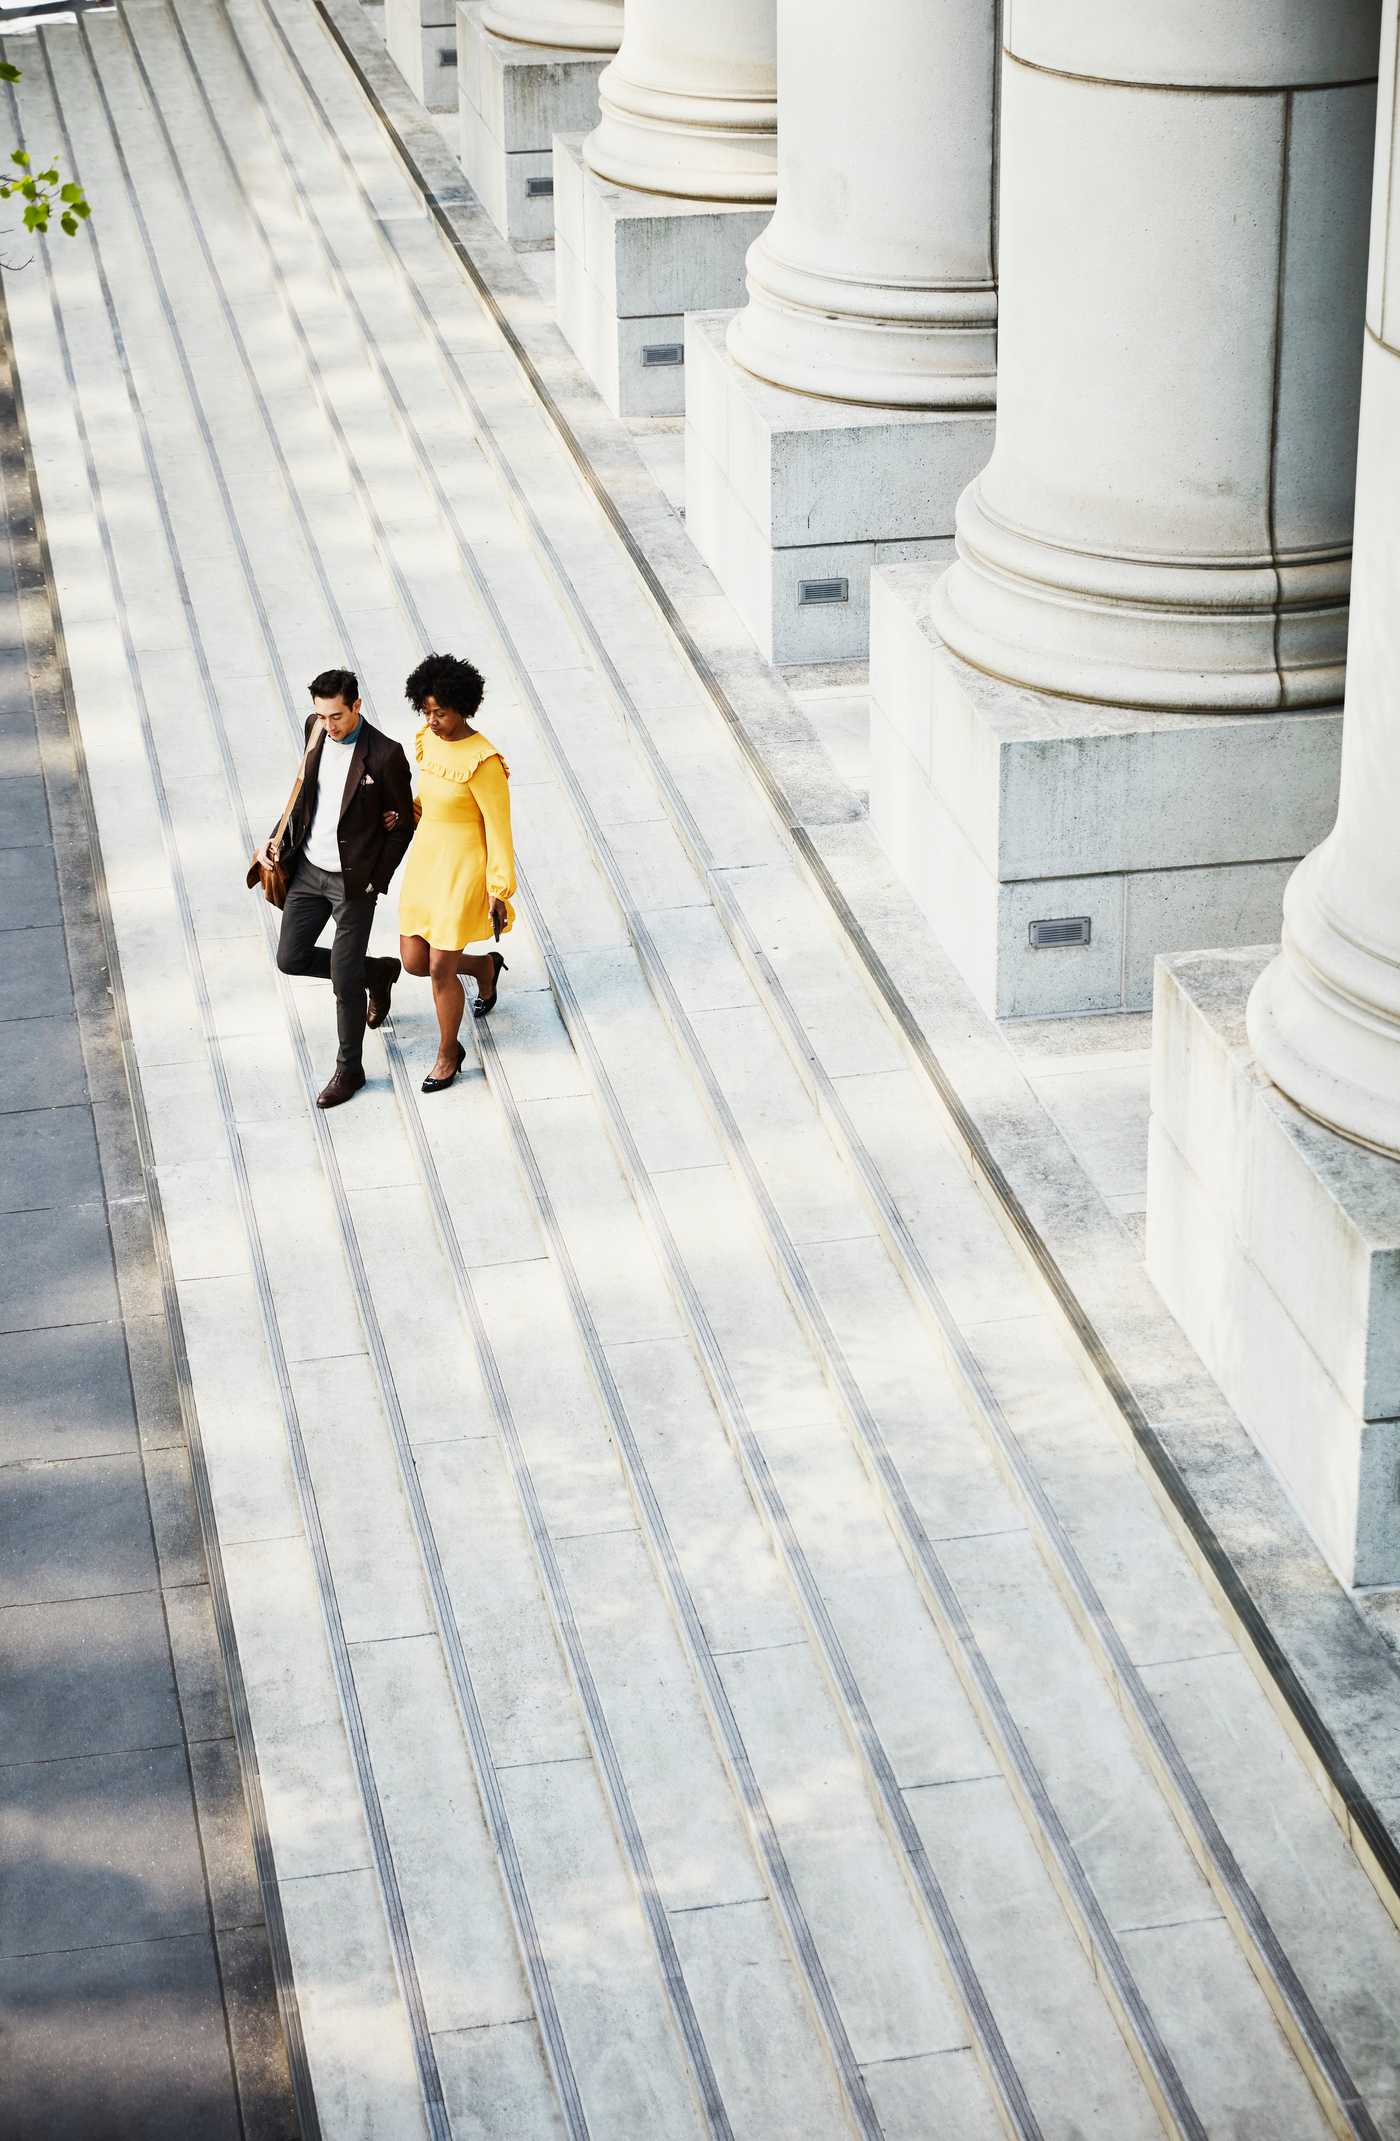 Overhead view of couple walking down steps of building